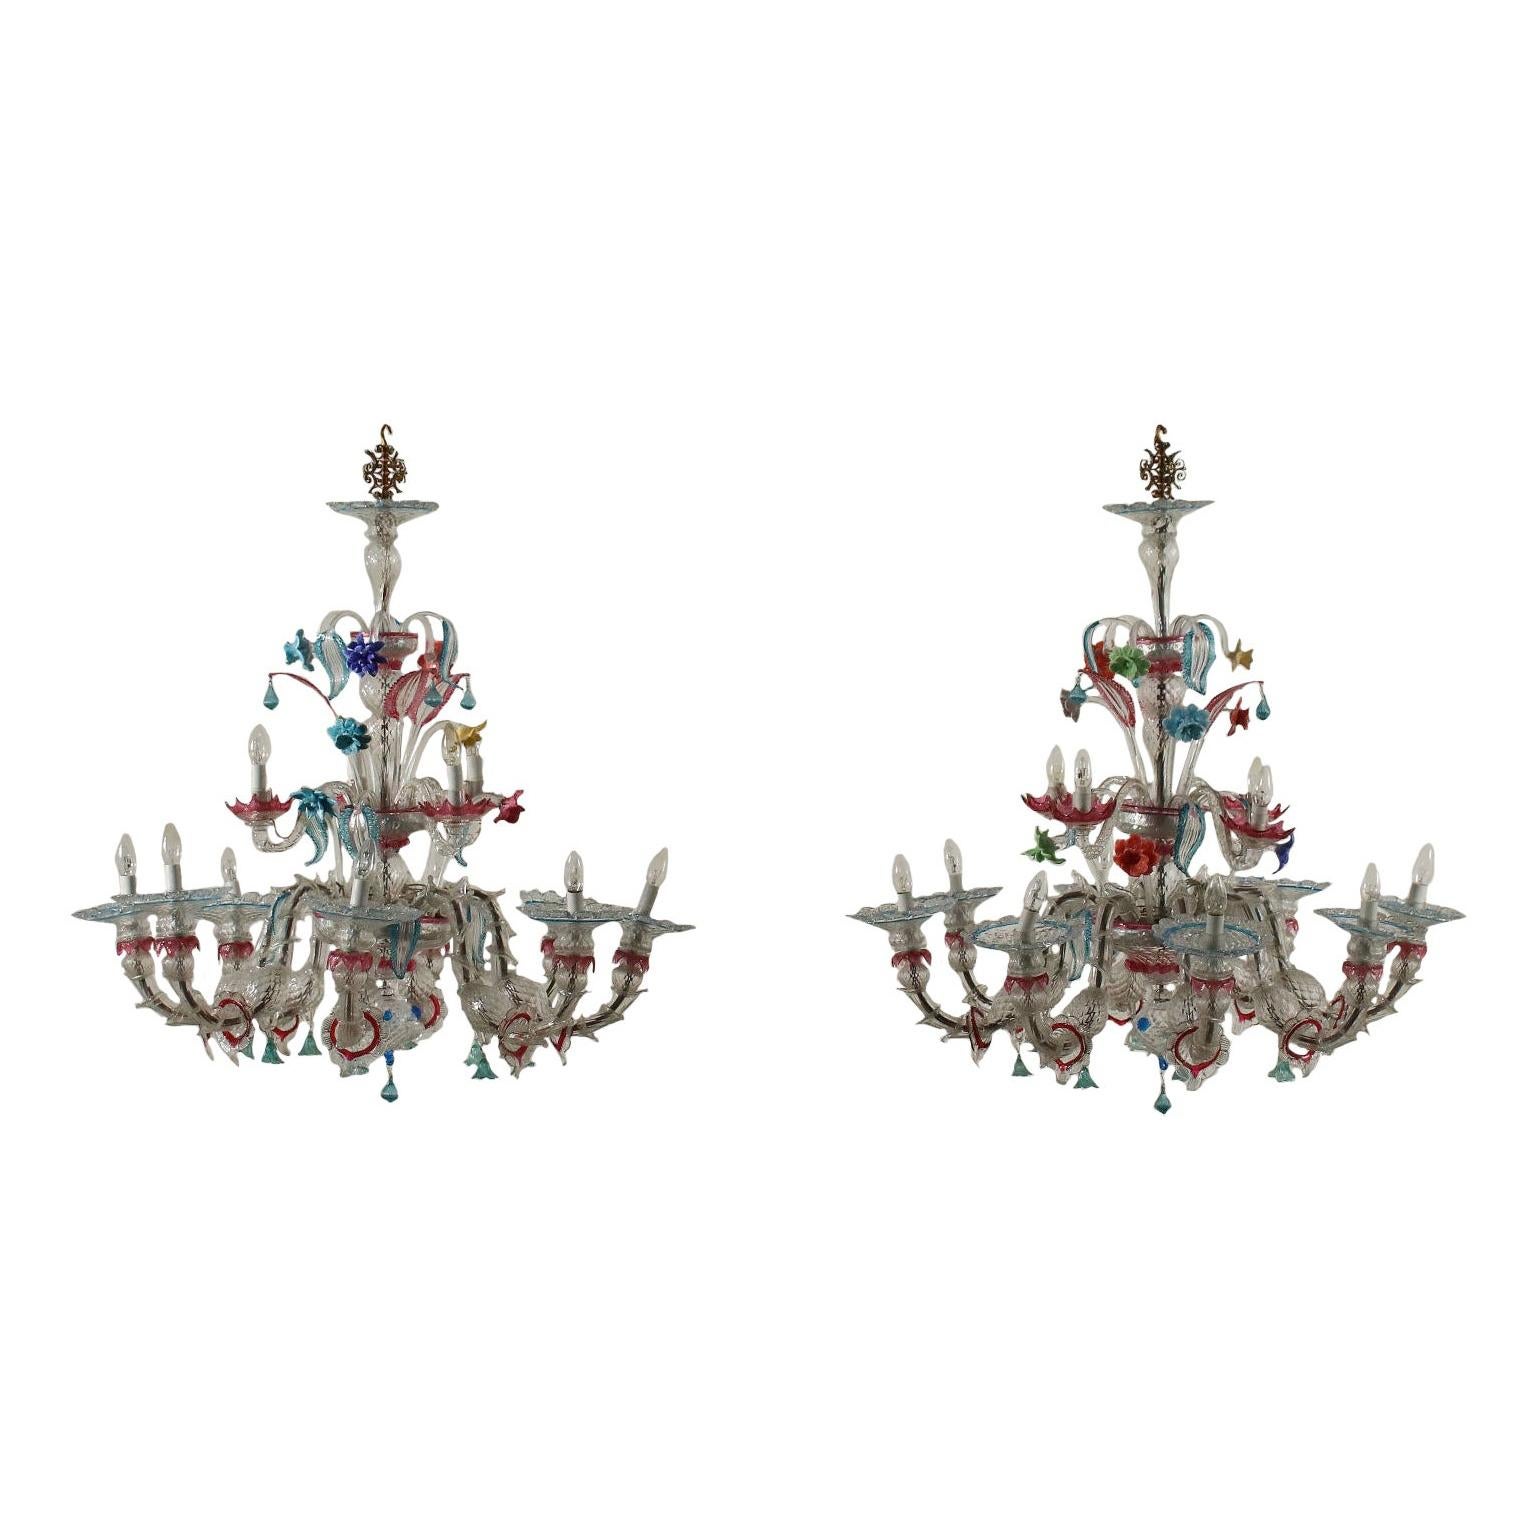 Pair of Chandeliers Blown Glass Murano, Italy, 20th Century